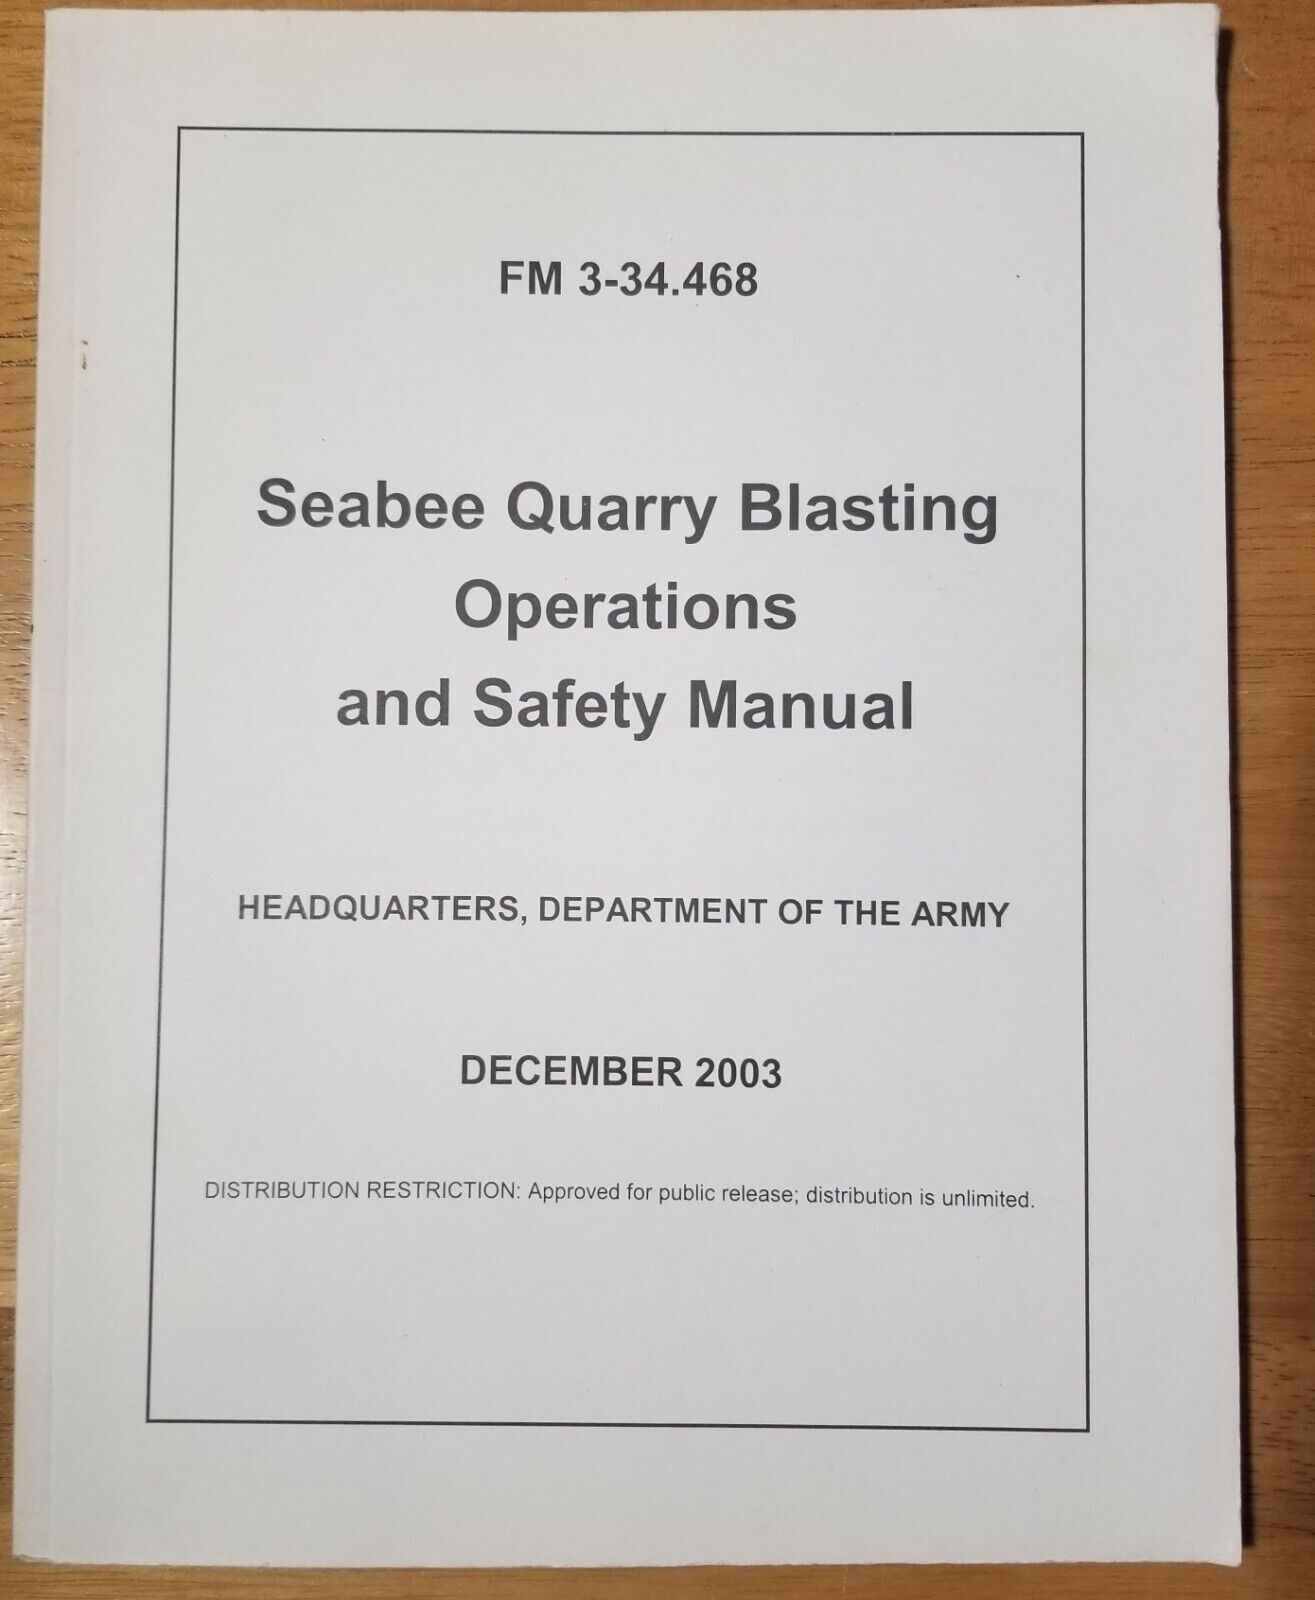 FM 3-34.468 Seabee Quarry Blasting Operations and Safety Manual, December 2003